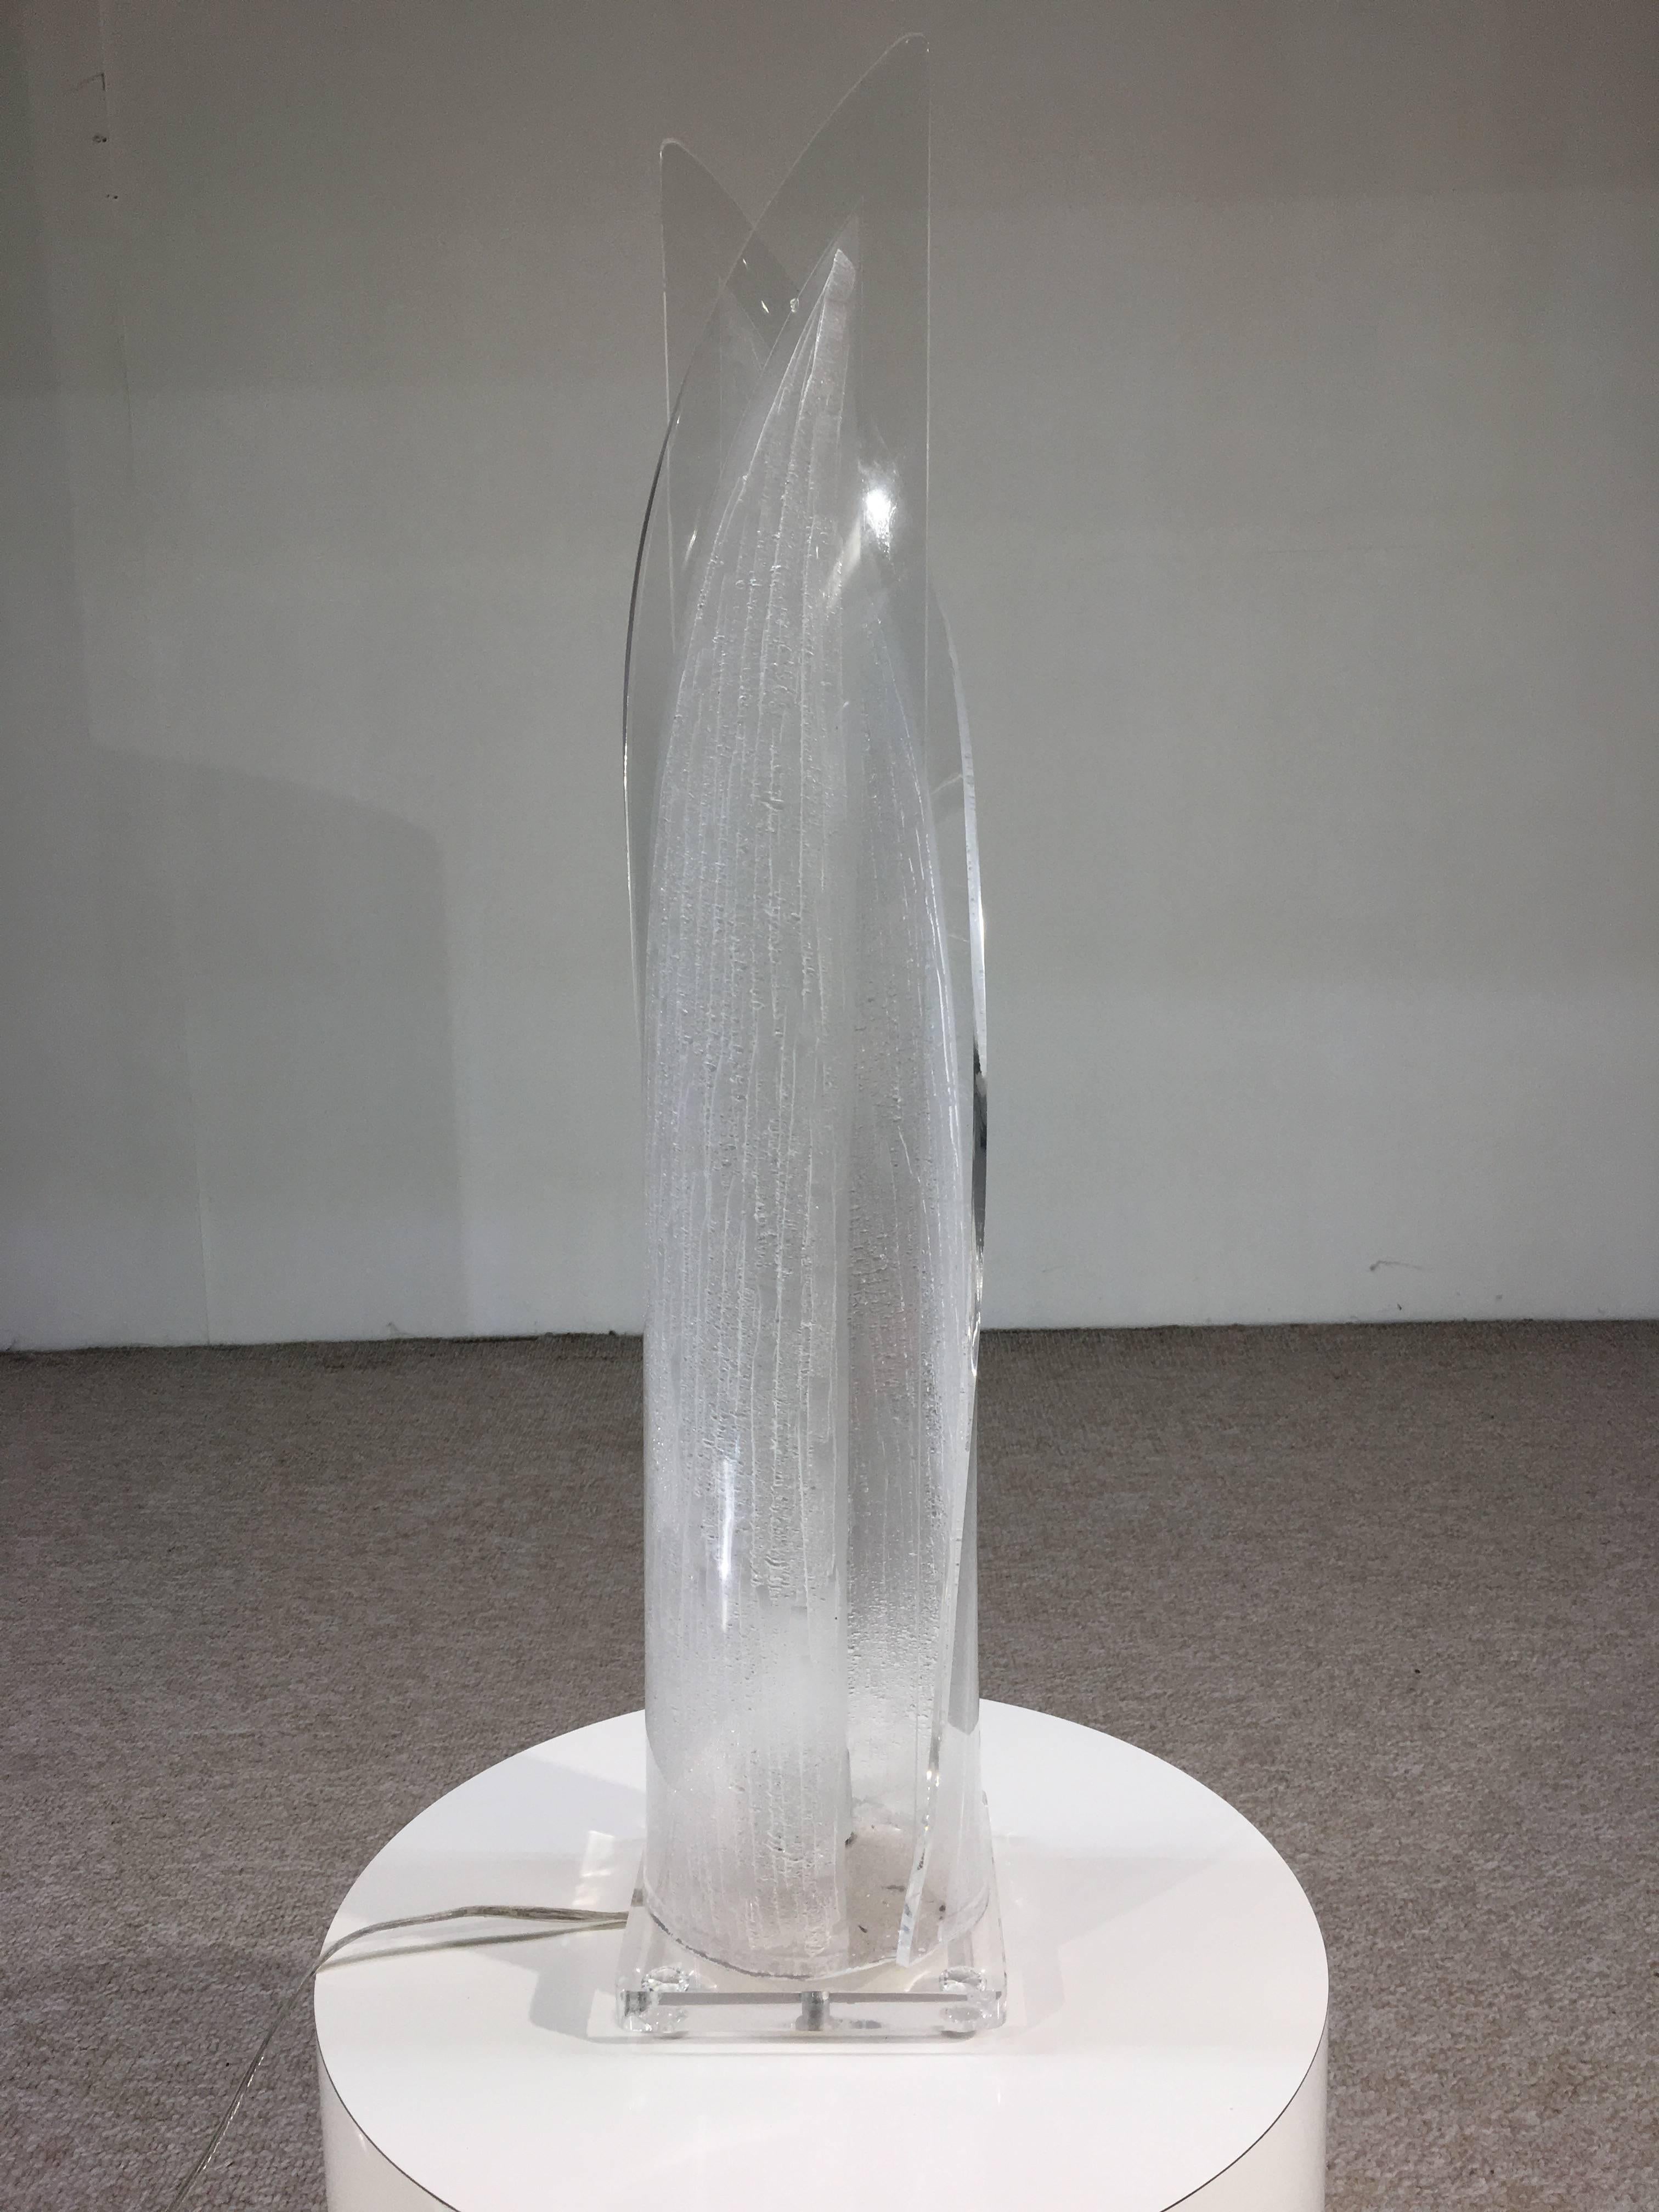 A beautiful sculptural table lamp in the manner of Rougier having sculptural acrylic form with blown bubble accents inside. Very beautiful!